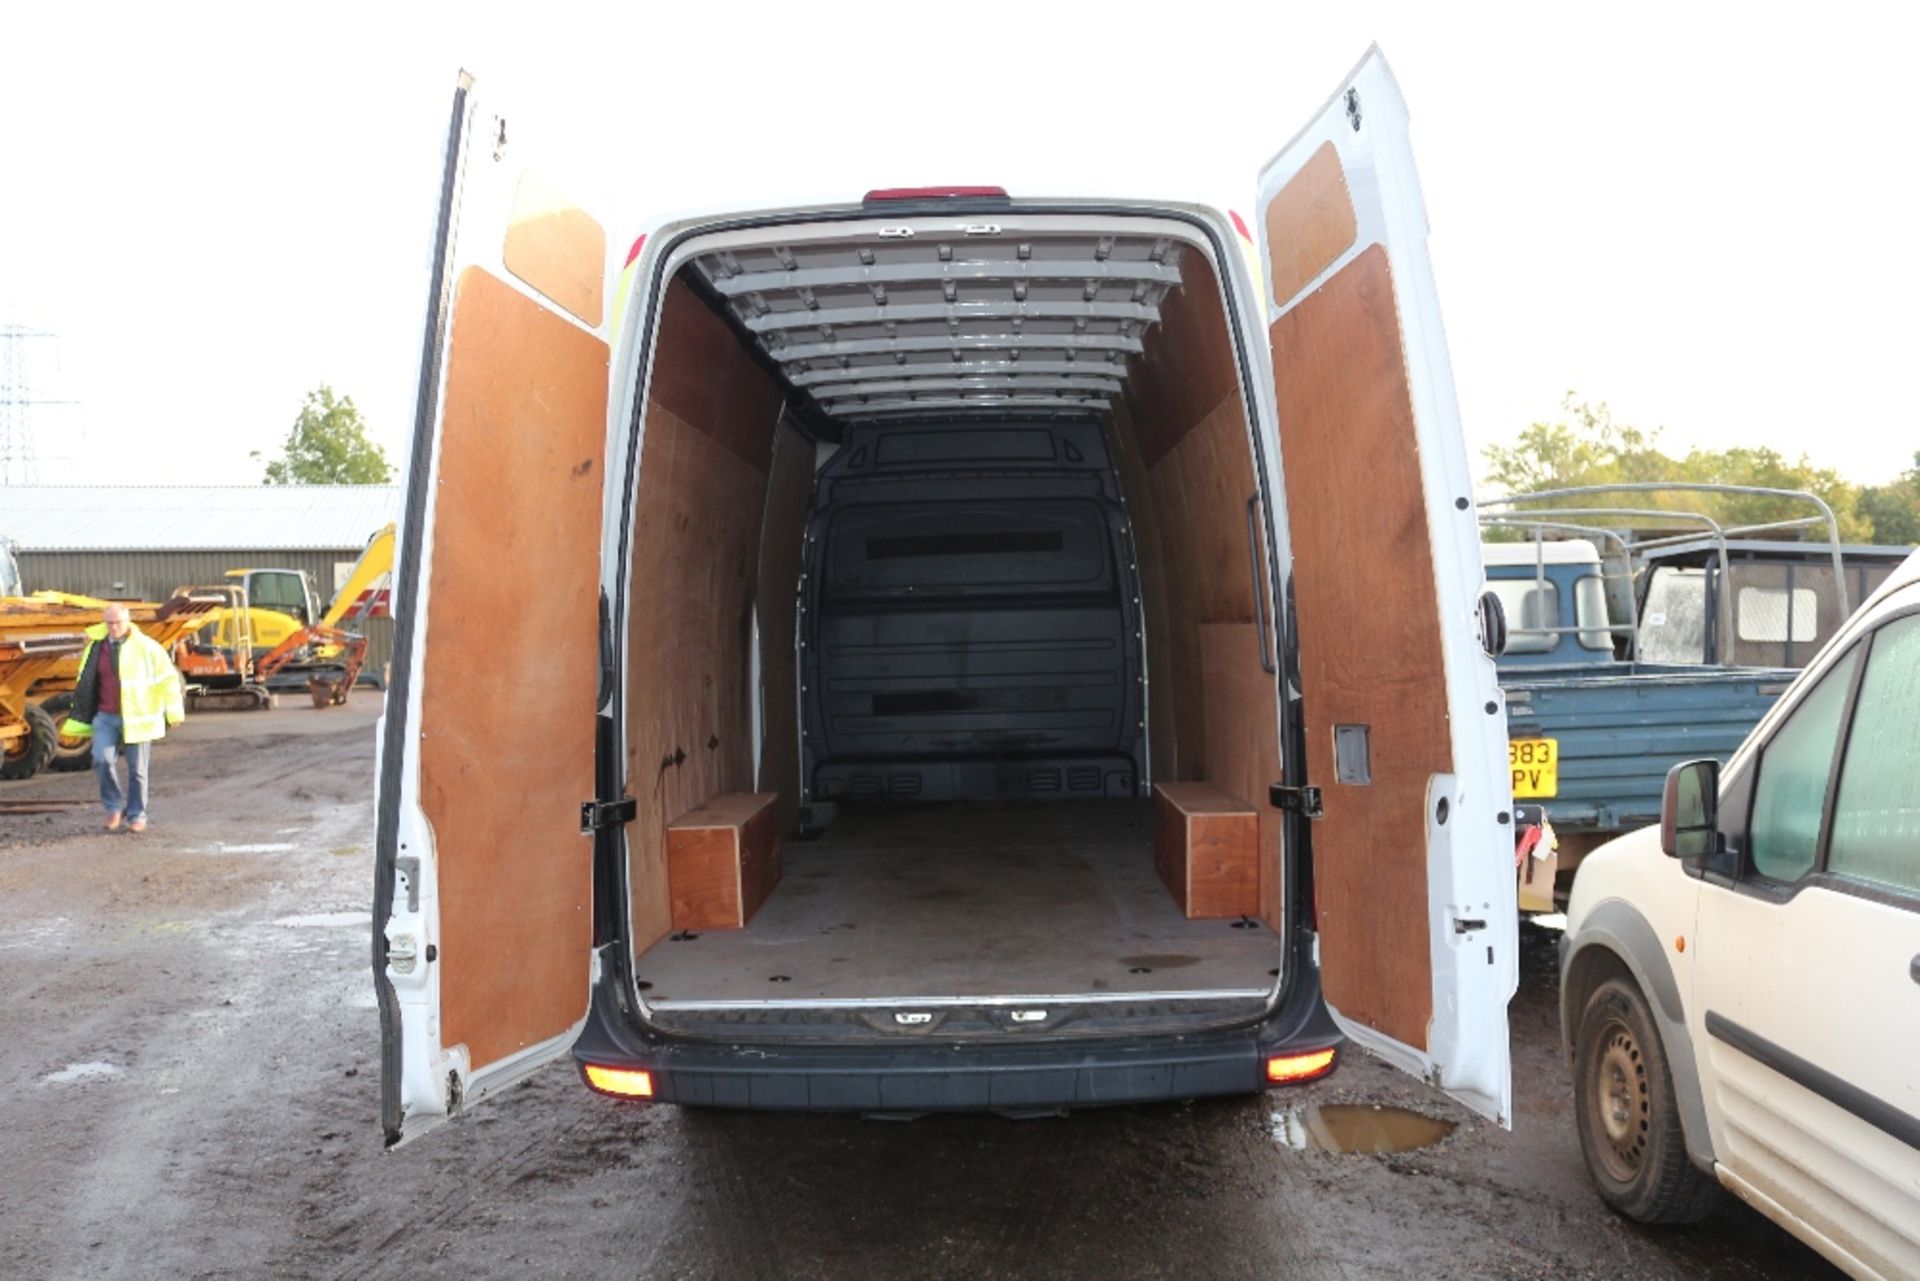 VW Crafter CR35 TDI van. Registration AU16 OVF. Date of first registration 04/16. Mileage to follow. - Image 4 of 4